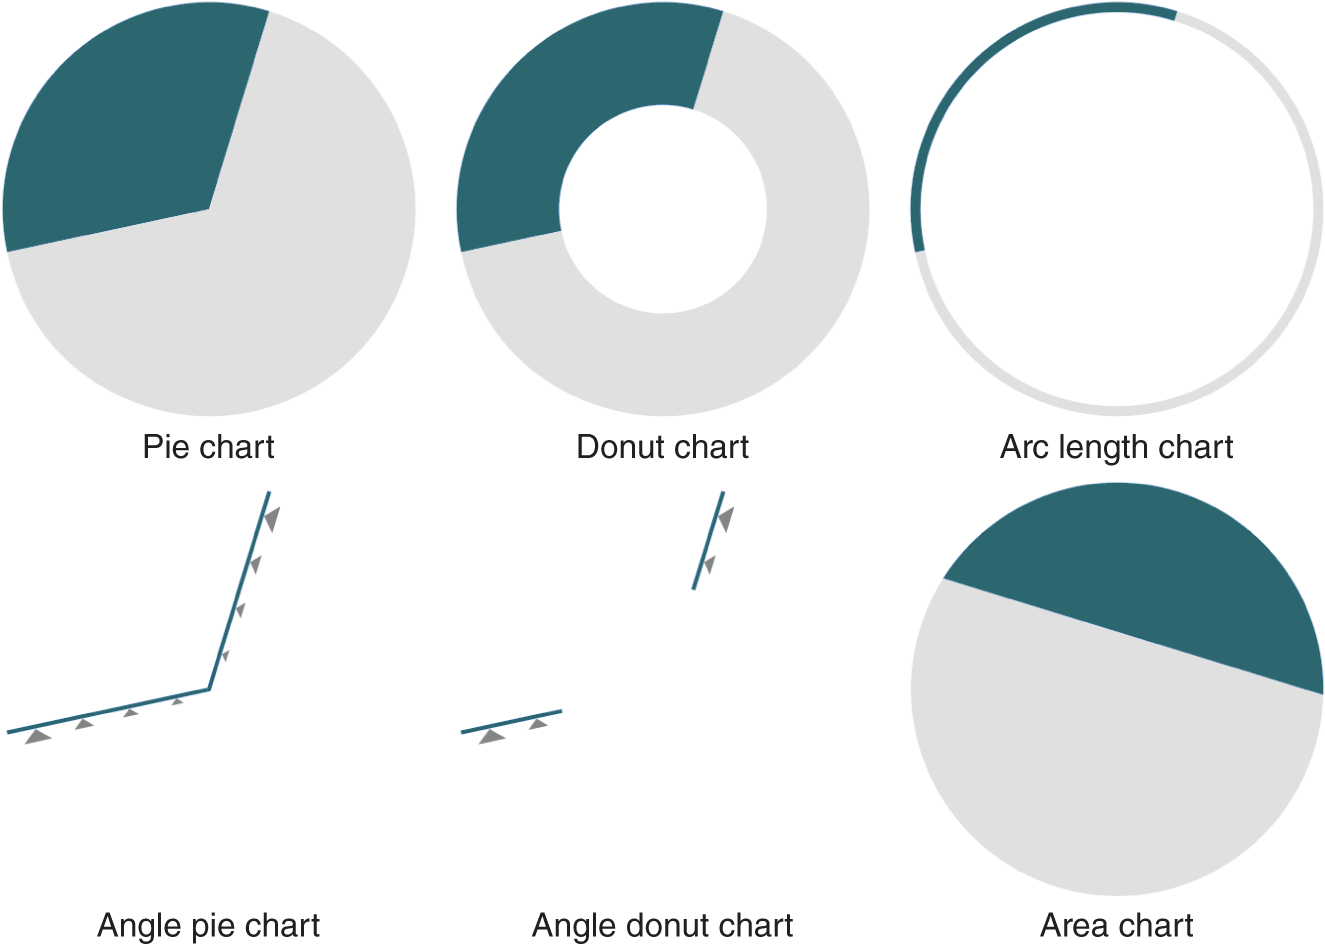 Schematic illustration of a sampling of charts used in the study of pie and donut chart encodings showing 33%.